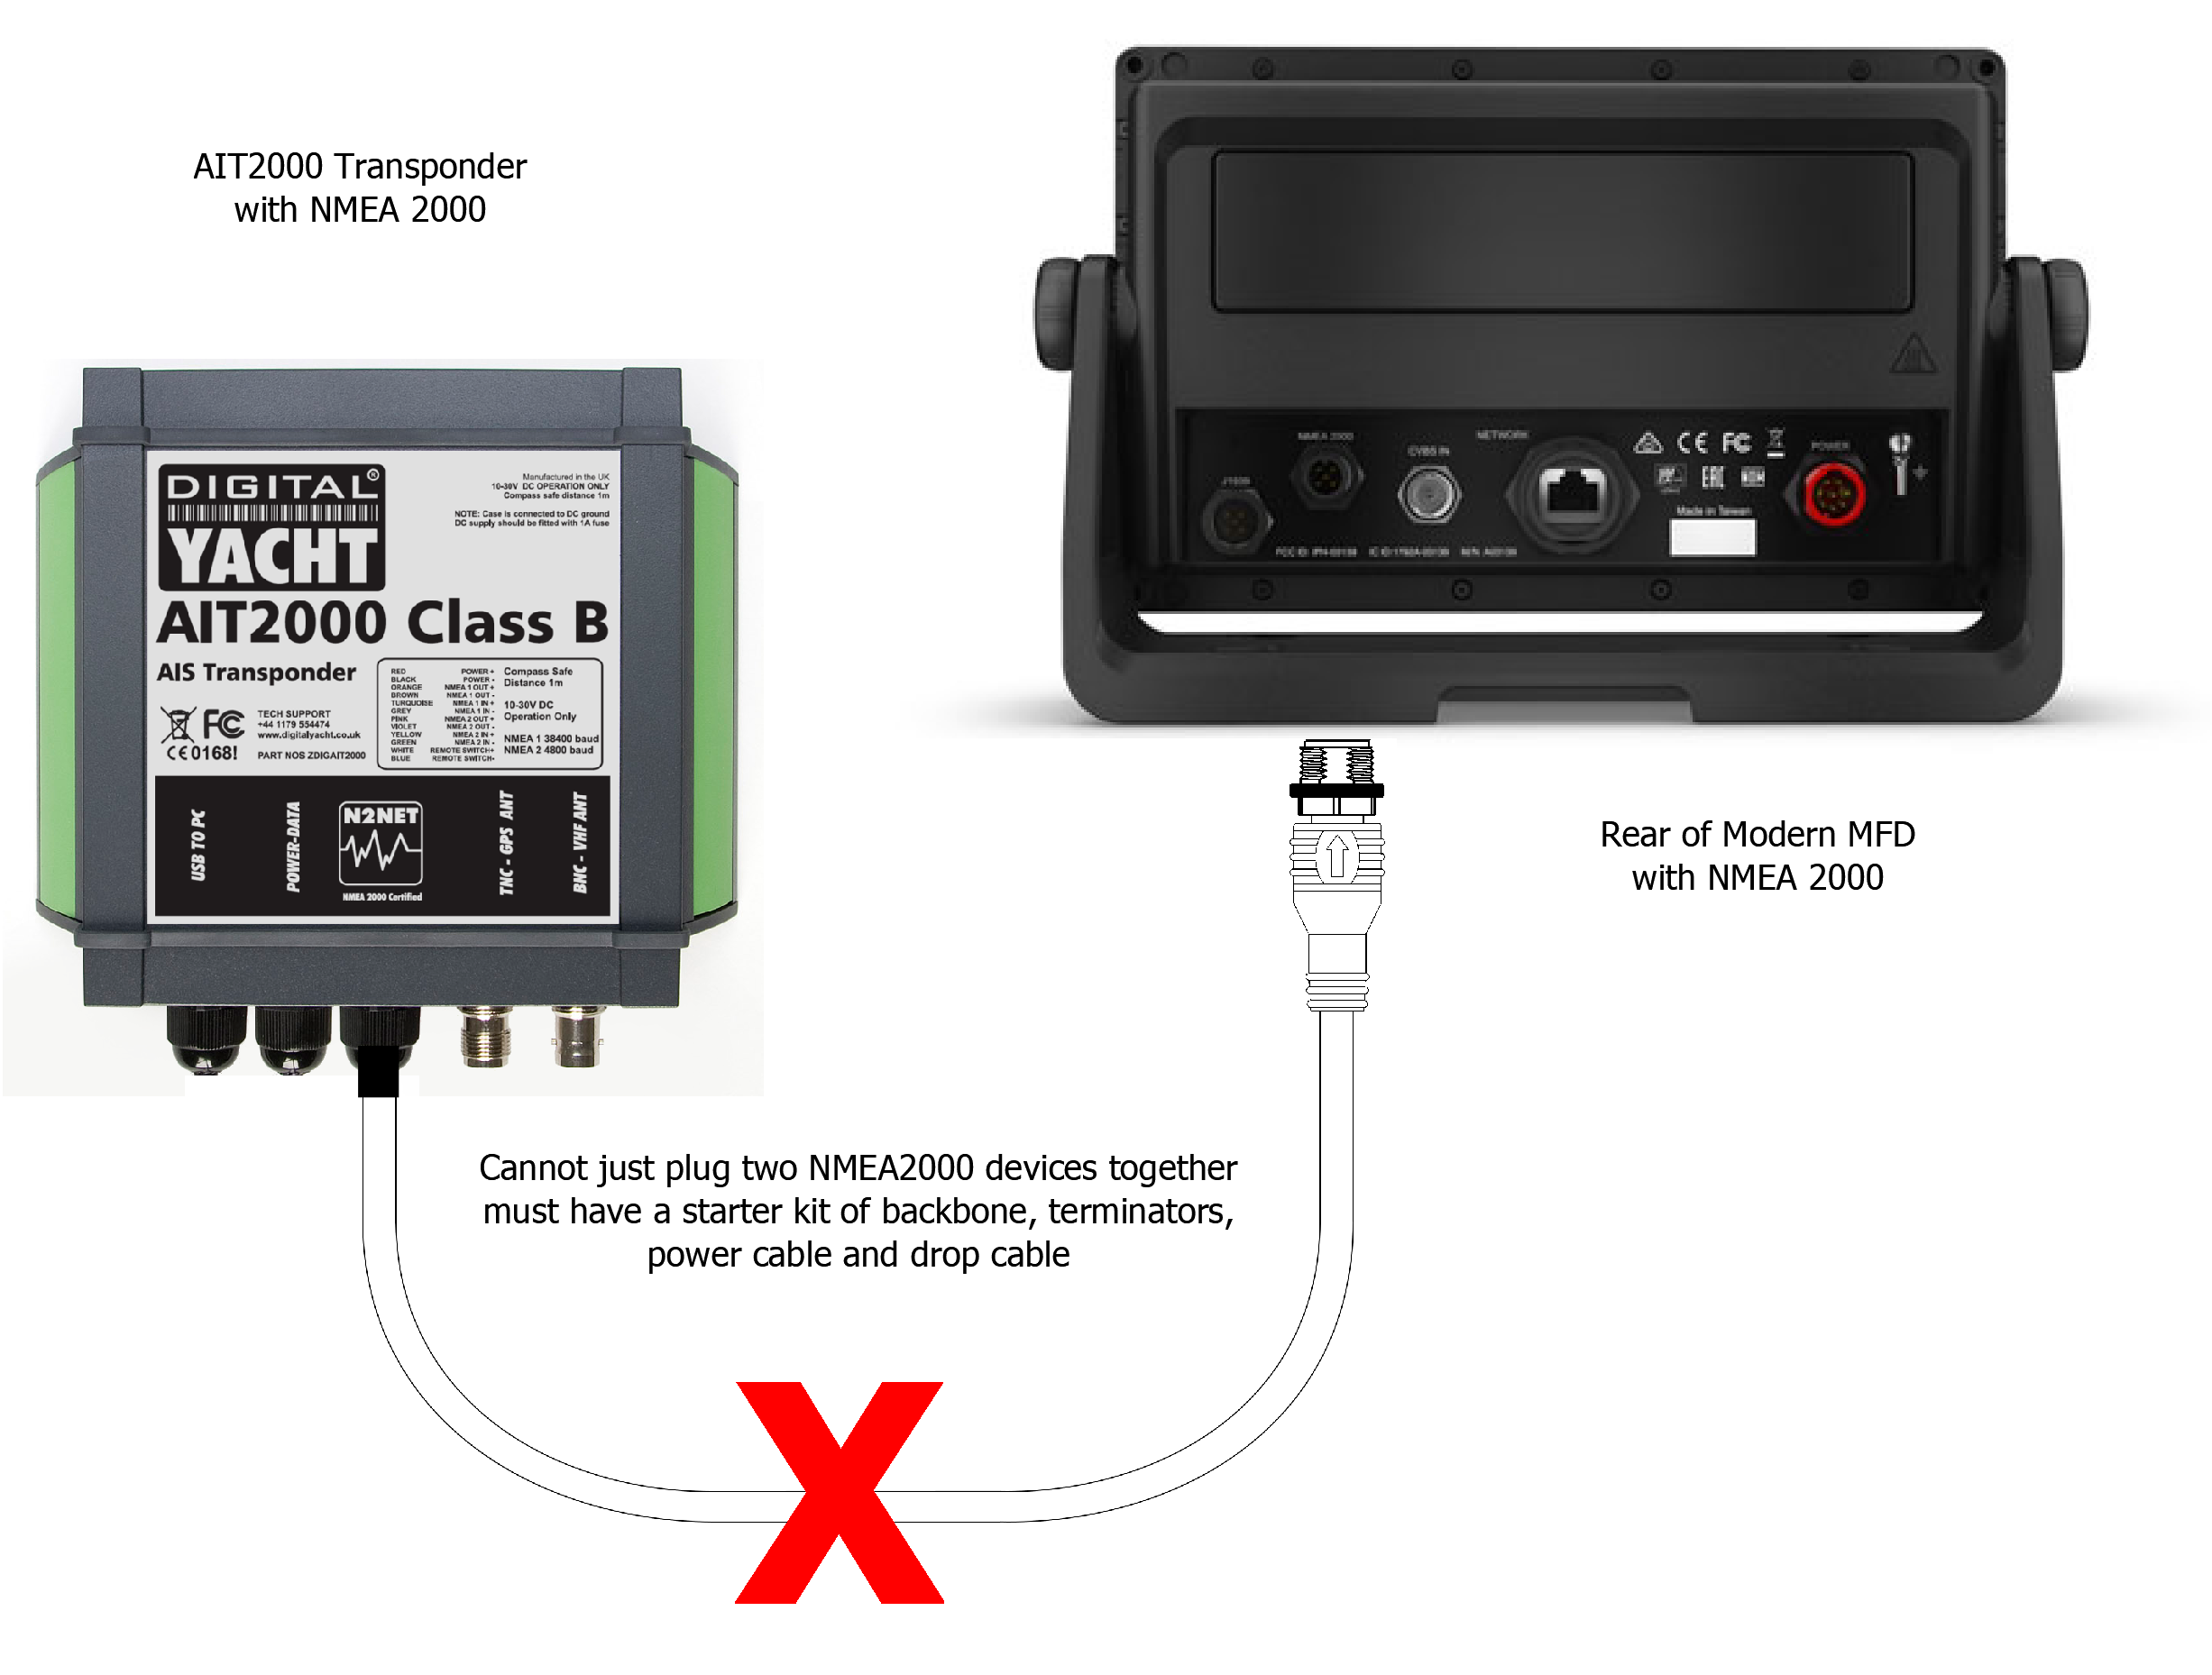 How to interface Digital Yacht's NMEA 2000 products to an NMEA 2000 network